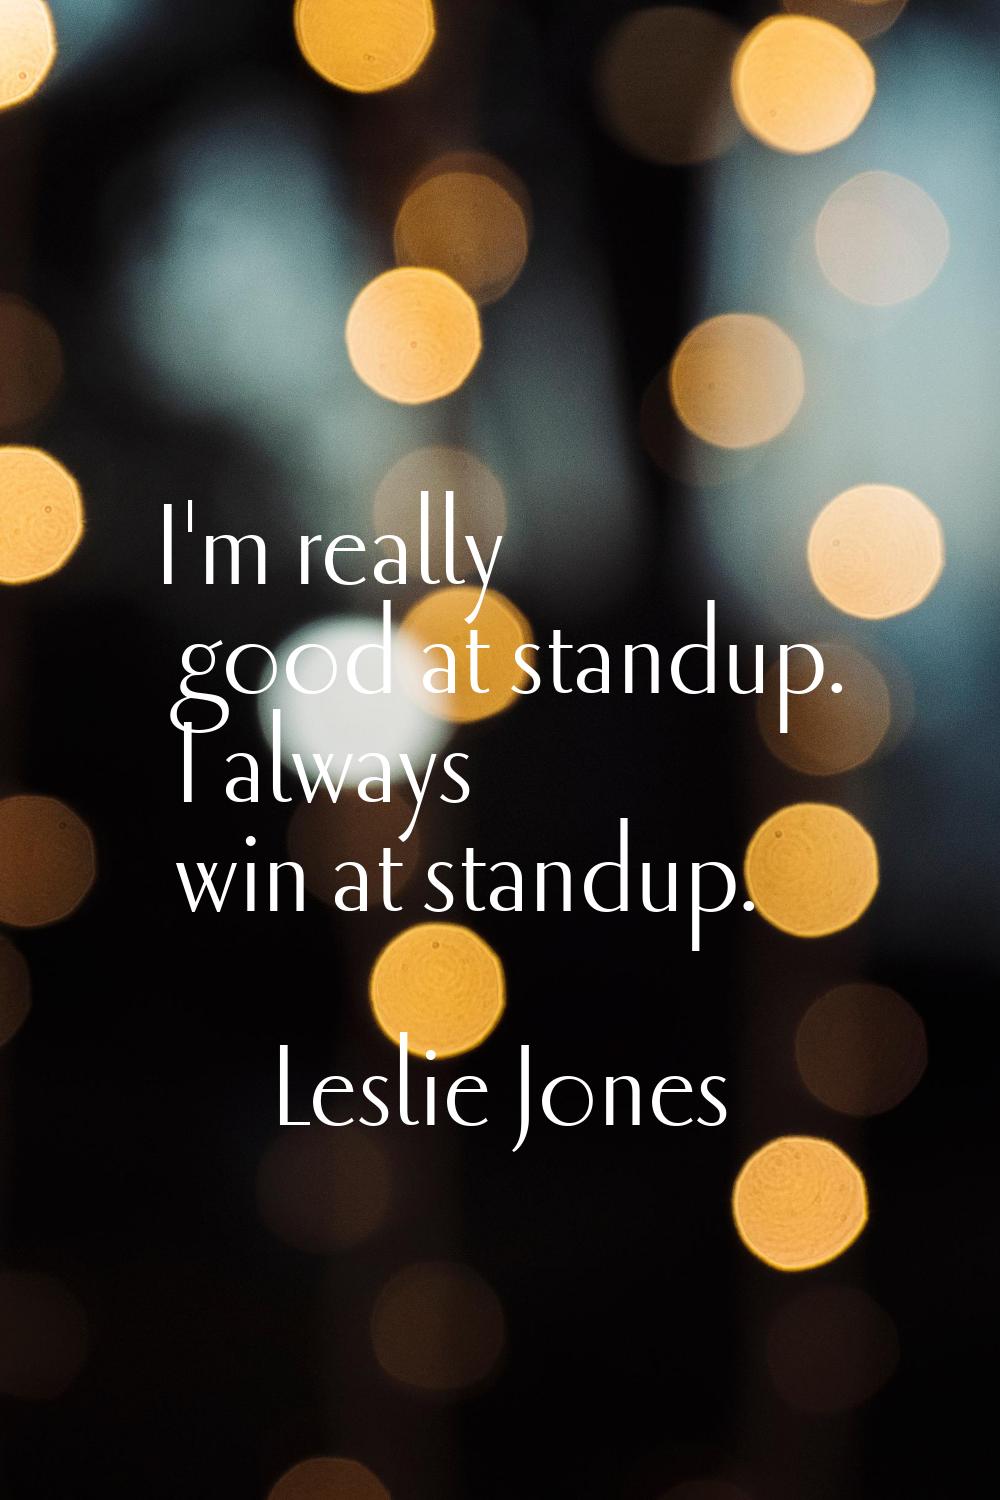 I'm really good at standup. I always win at standup.